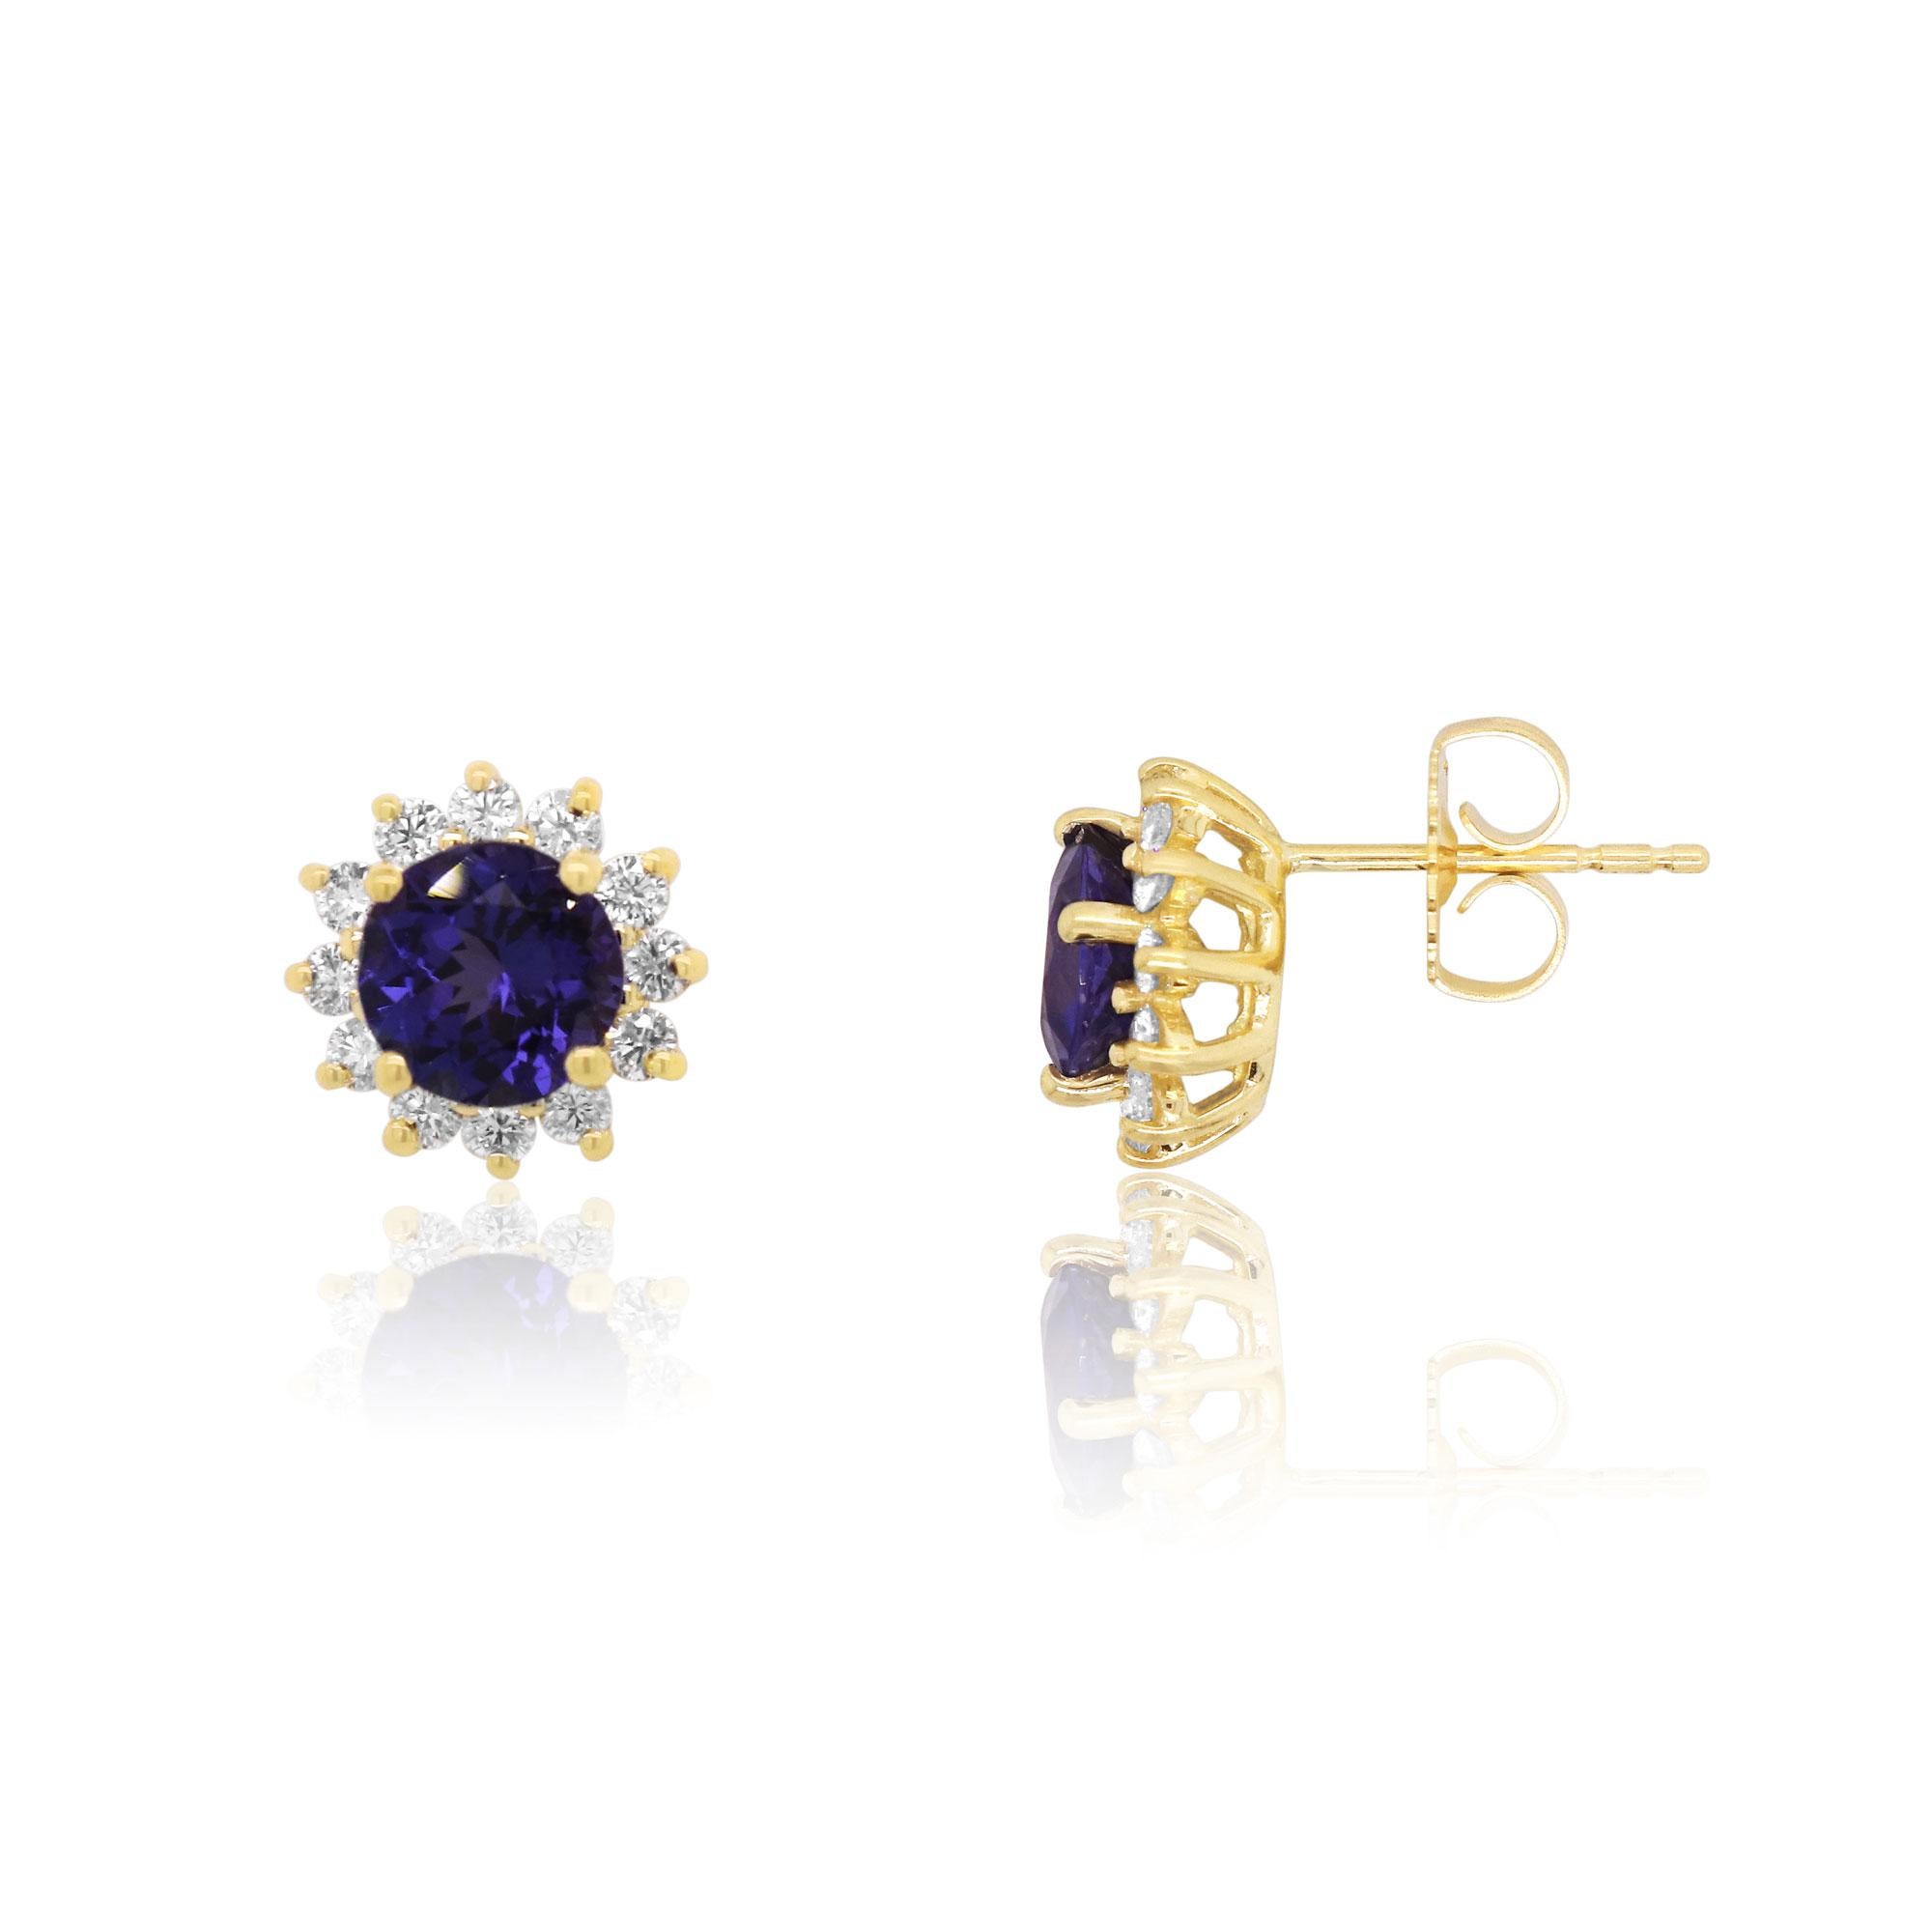 Material: 14k Yellow Gold 
Stone Details: 2 Round Shape Tanzanites at 2.65 Carats Total Weight
24 Round Brilliant White Diamonds at 0.65 Carats. Clarity: SI / Color: H-I

Fine one-of-a kind craftsmanship meets incredible quality in this breathtaking